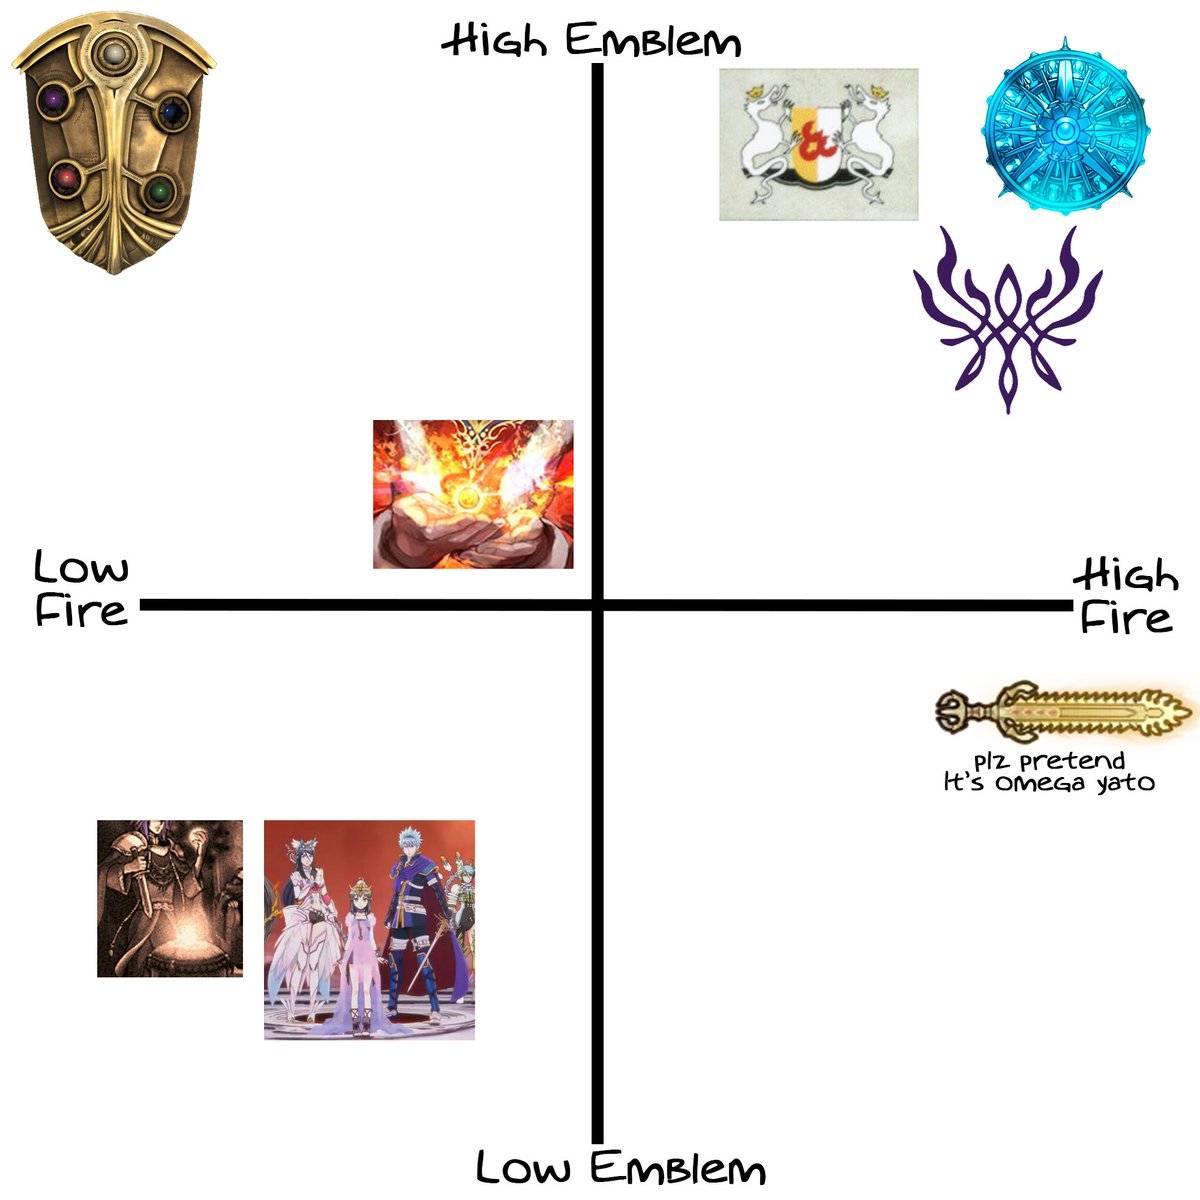 RT @cearavs: Fire Emblem alignment chart based on how much Firey or Emblemy they are https://t.co/Z2MJTah4y8